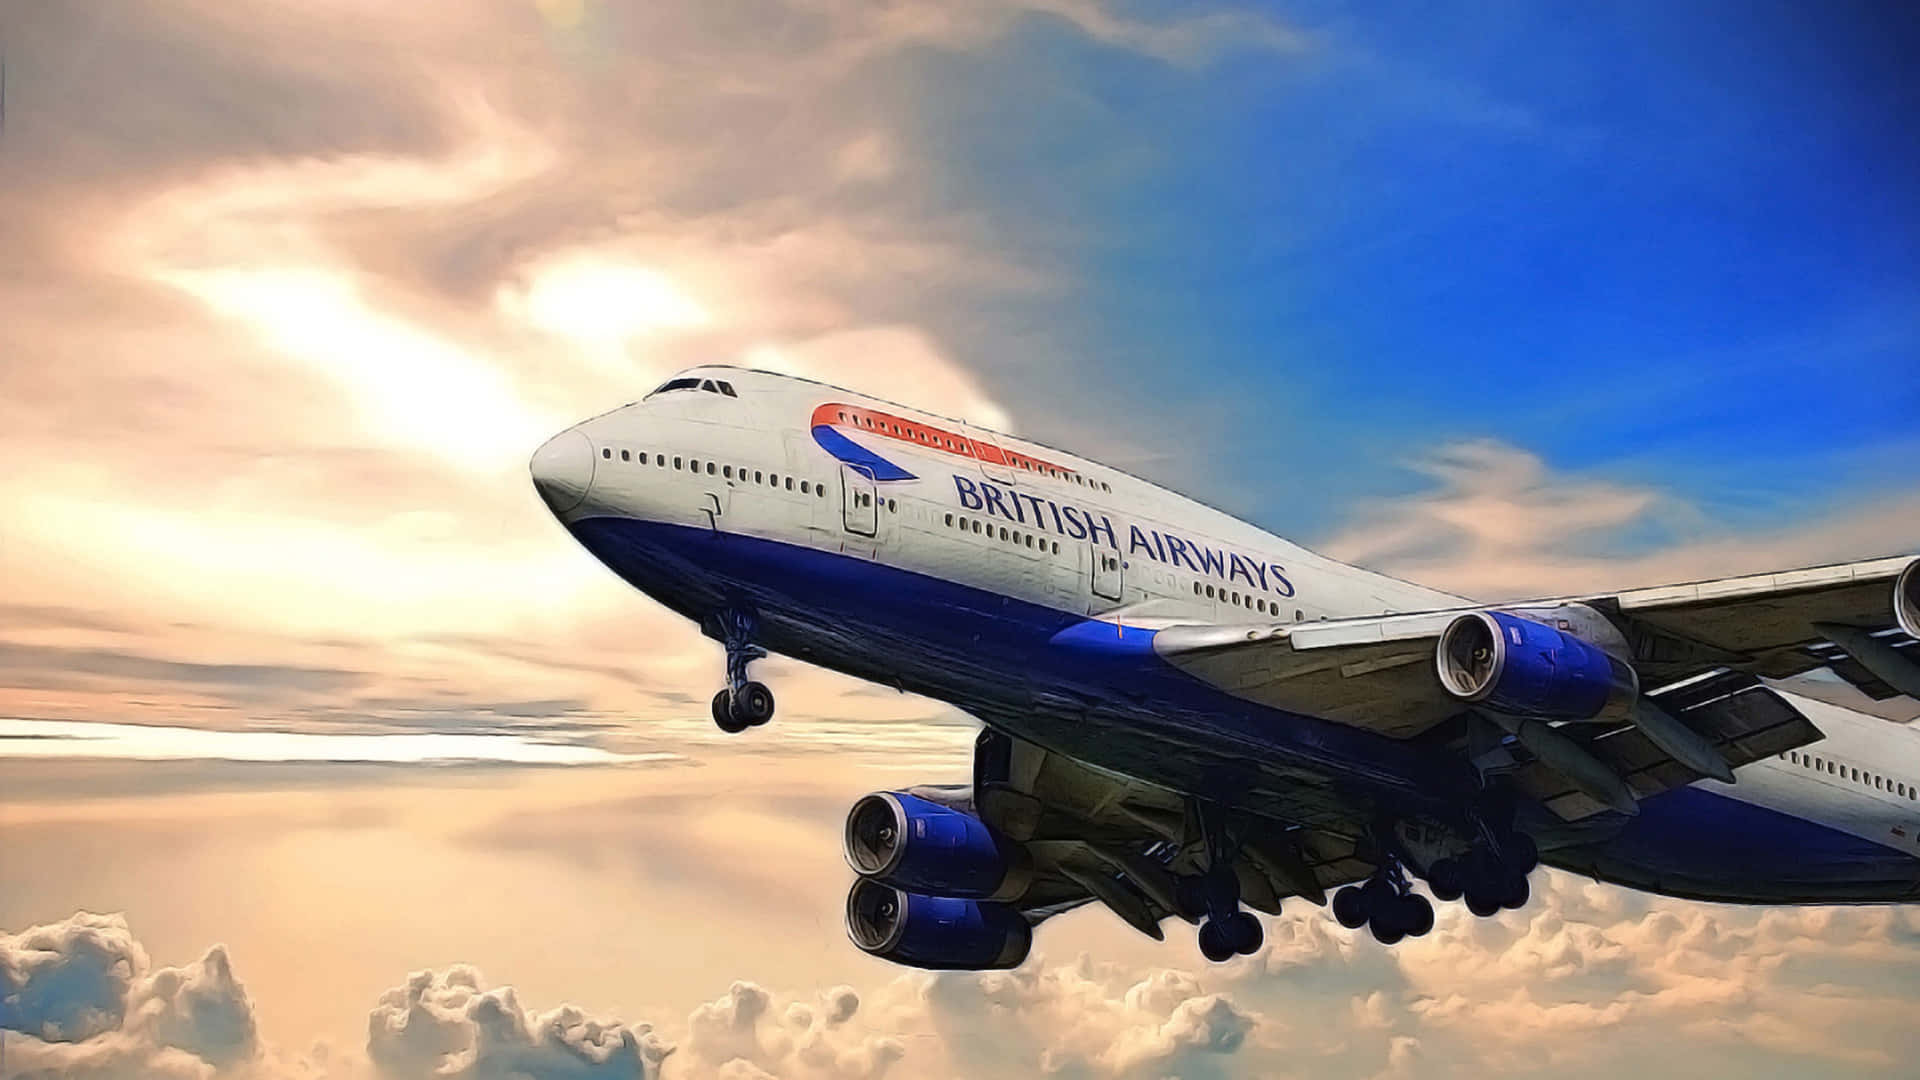 Image  Majestic Boeing 747 Airplane in the Sky Wallpaper